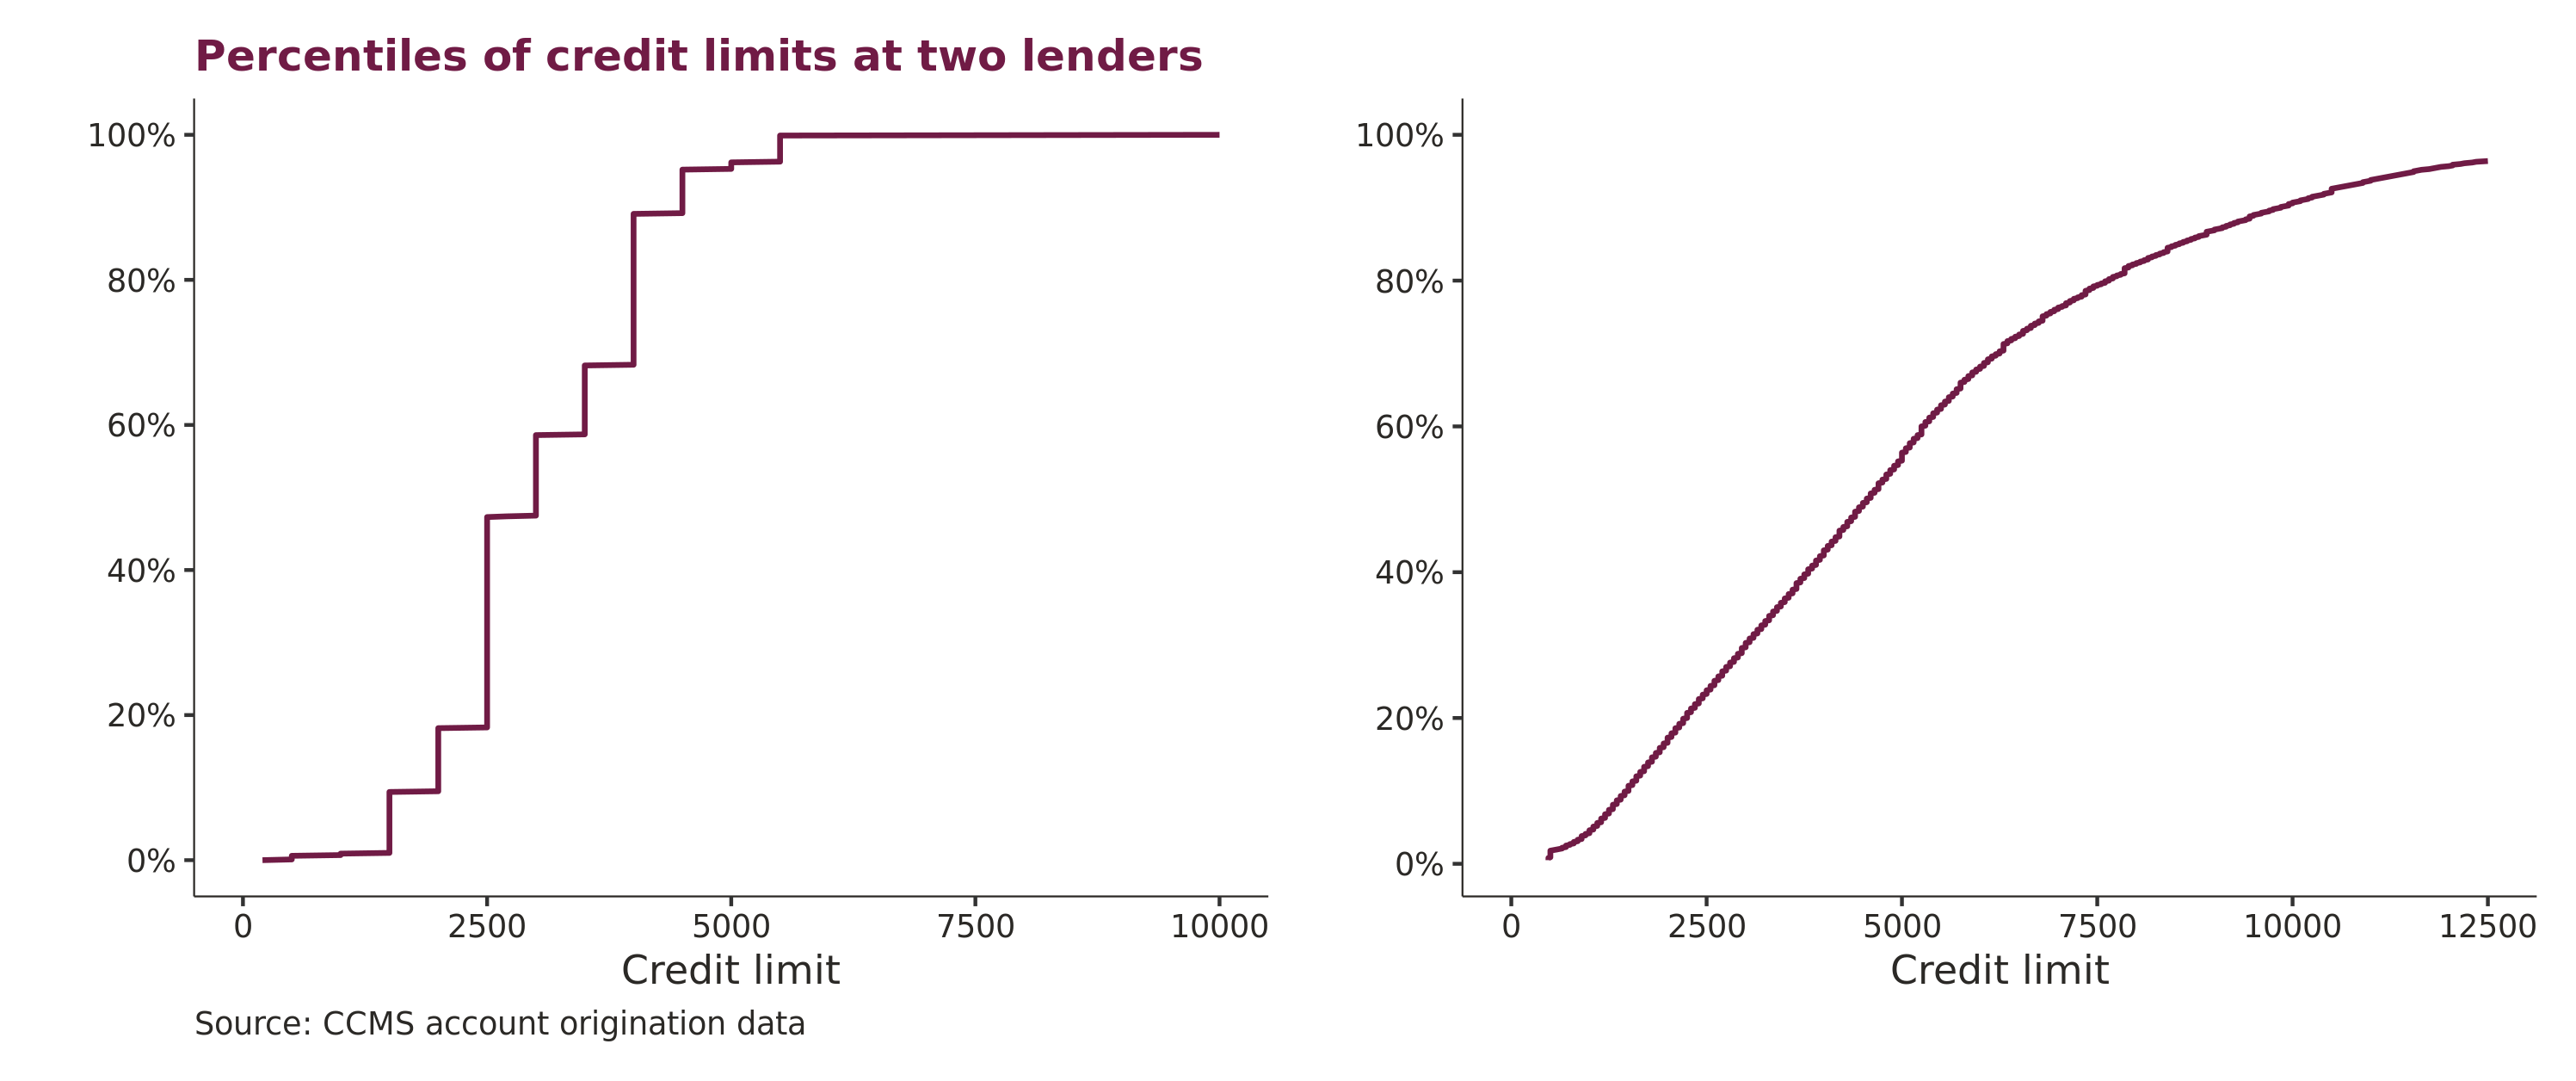 Percentiles of credit limits at two lenders